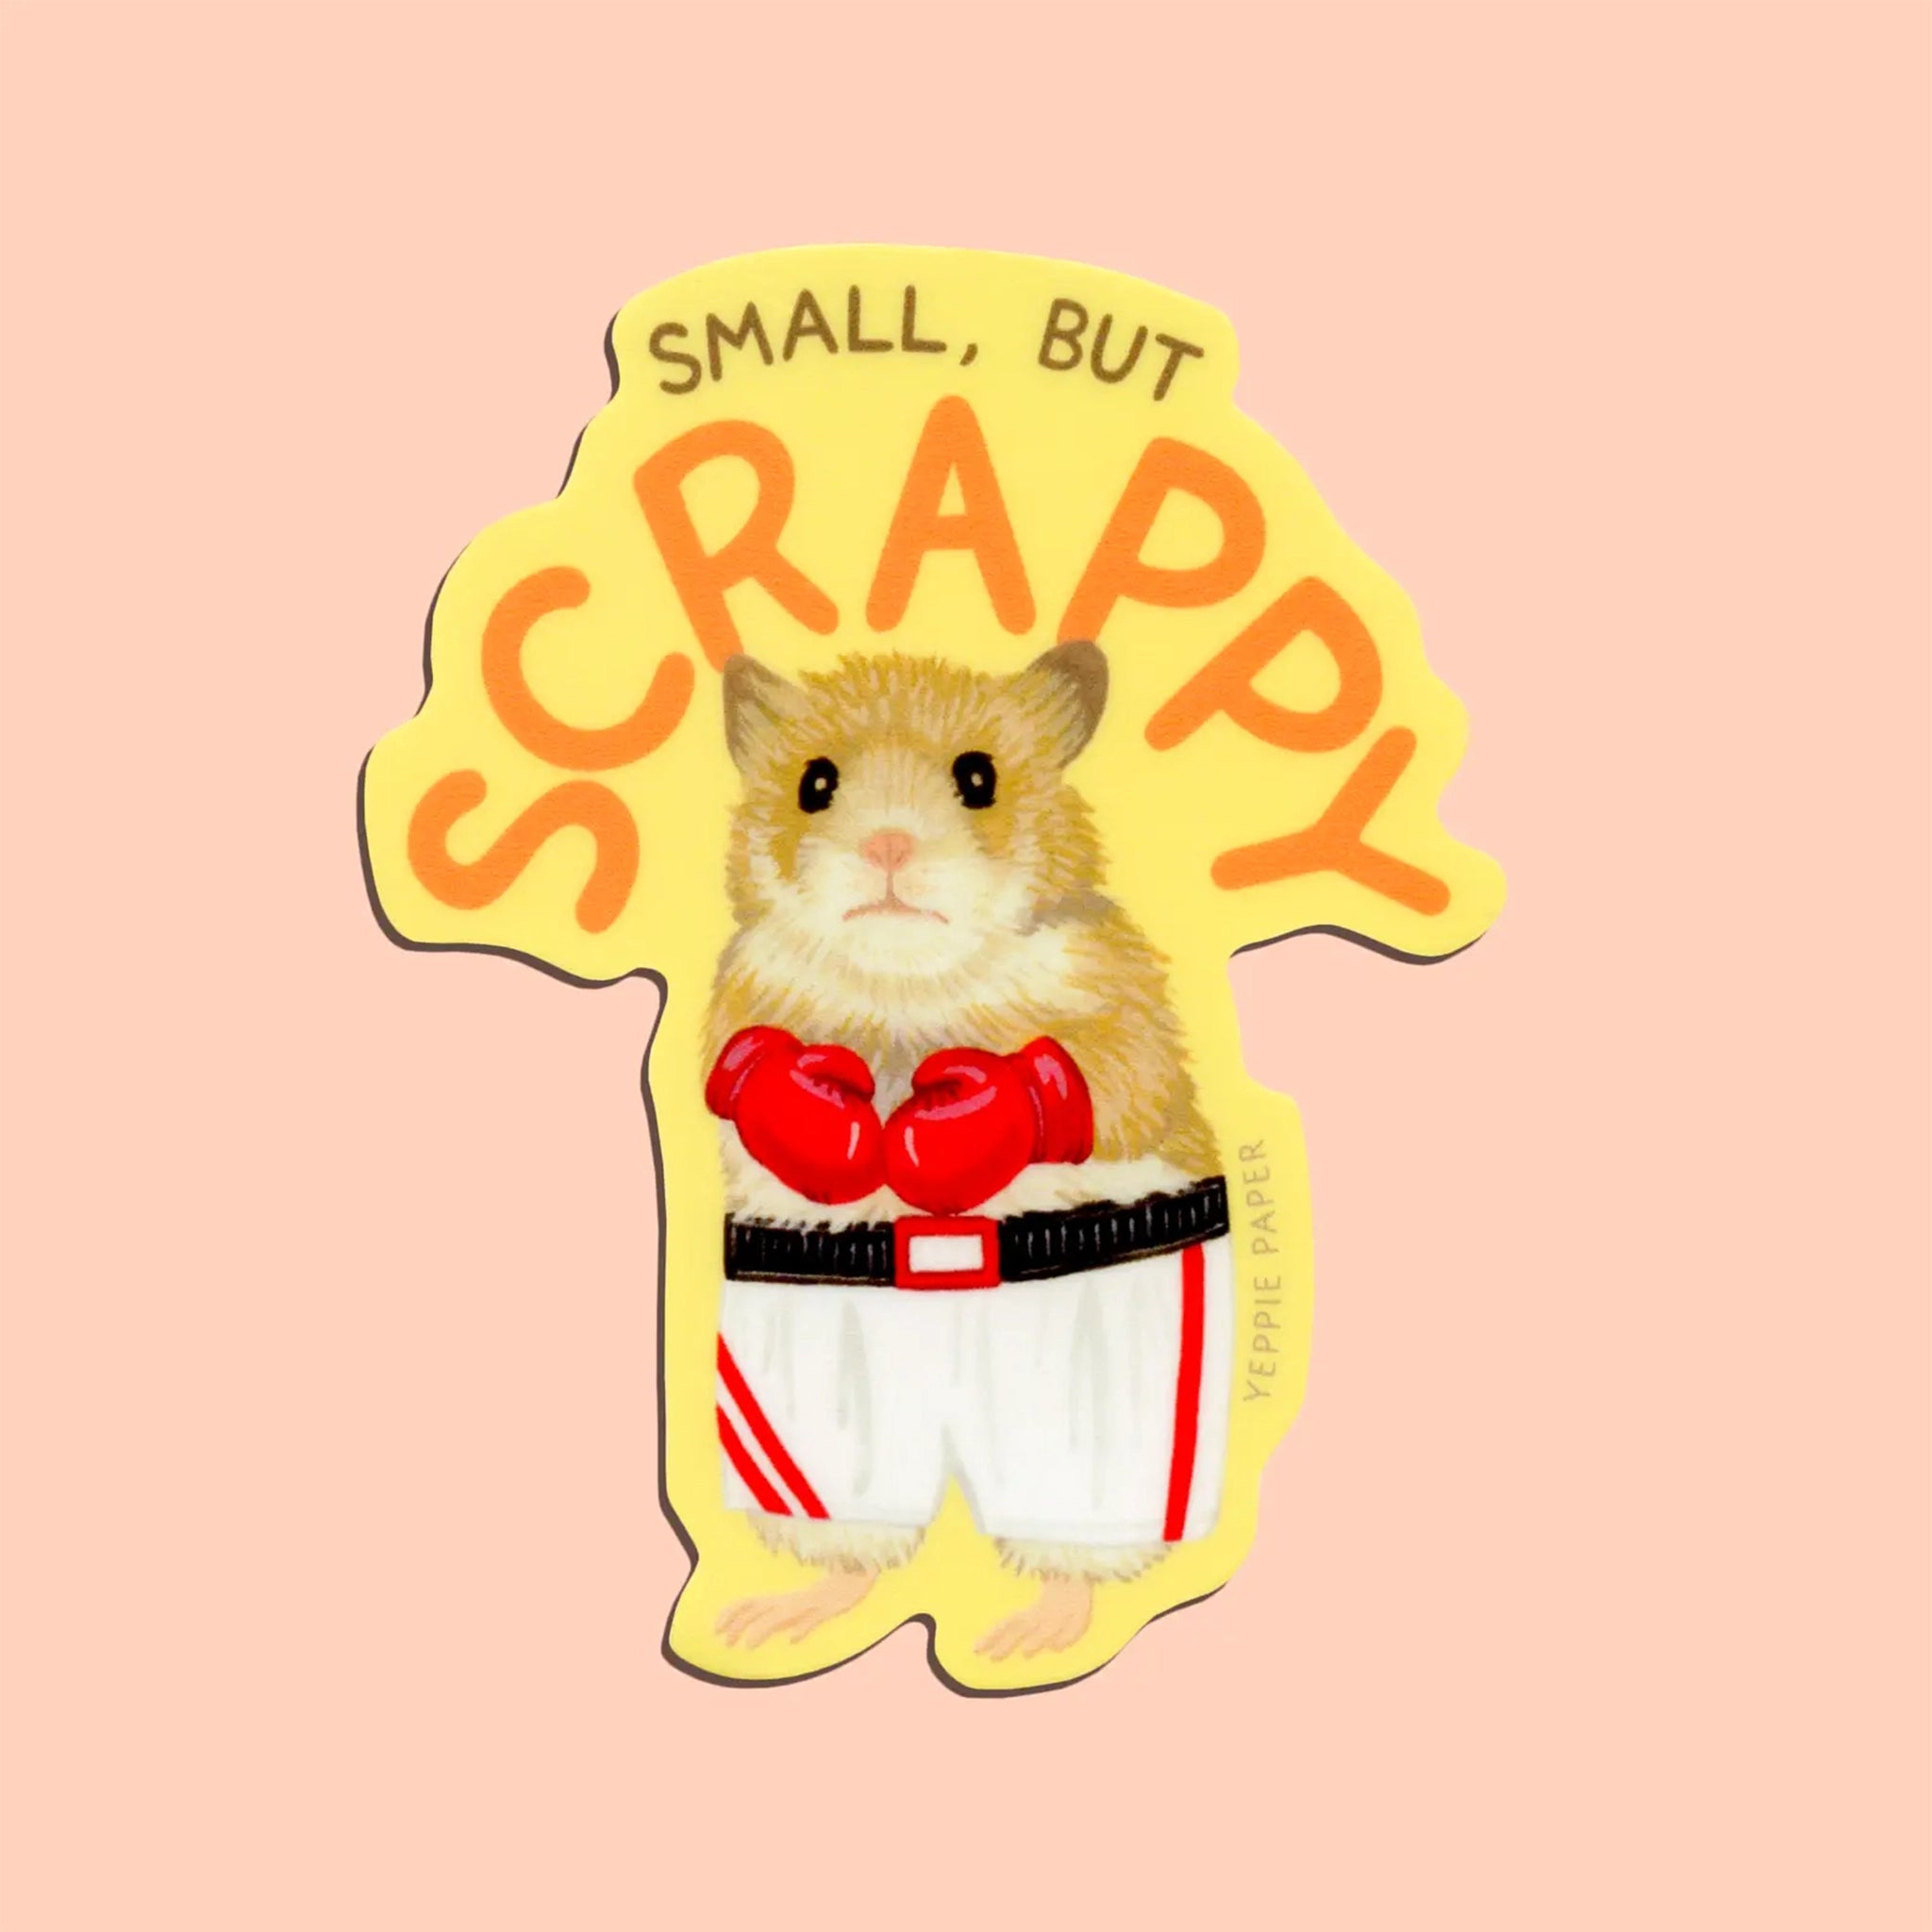 On a peachy background is a light yellow sticker with an illustration of a hamster suited up in boxing gear along with text above it that reads, &quot;Small, but Scrappy&quot;.